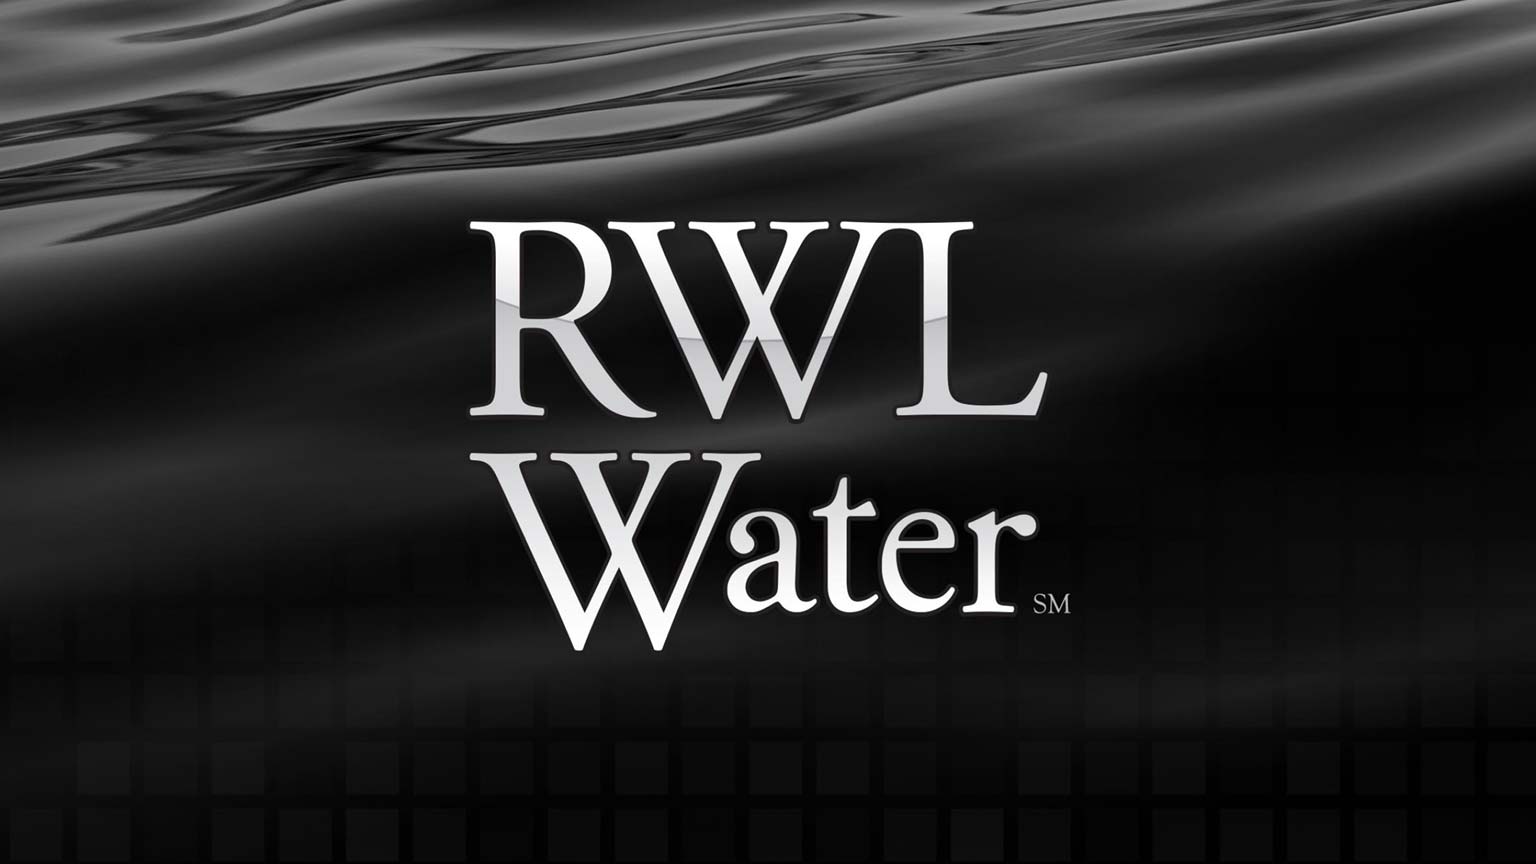 The RWL Water logo over a water.